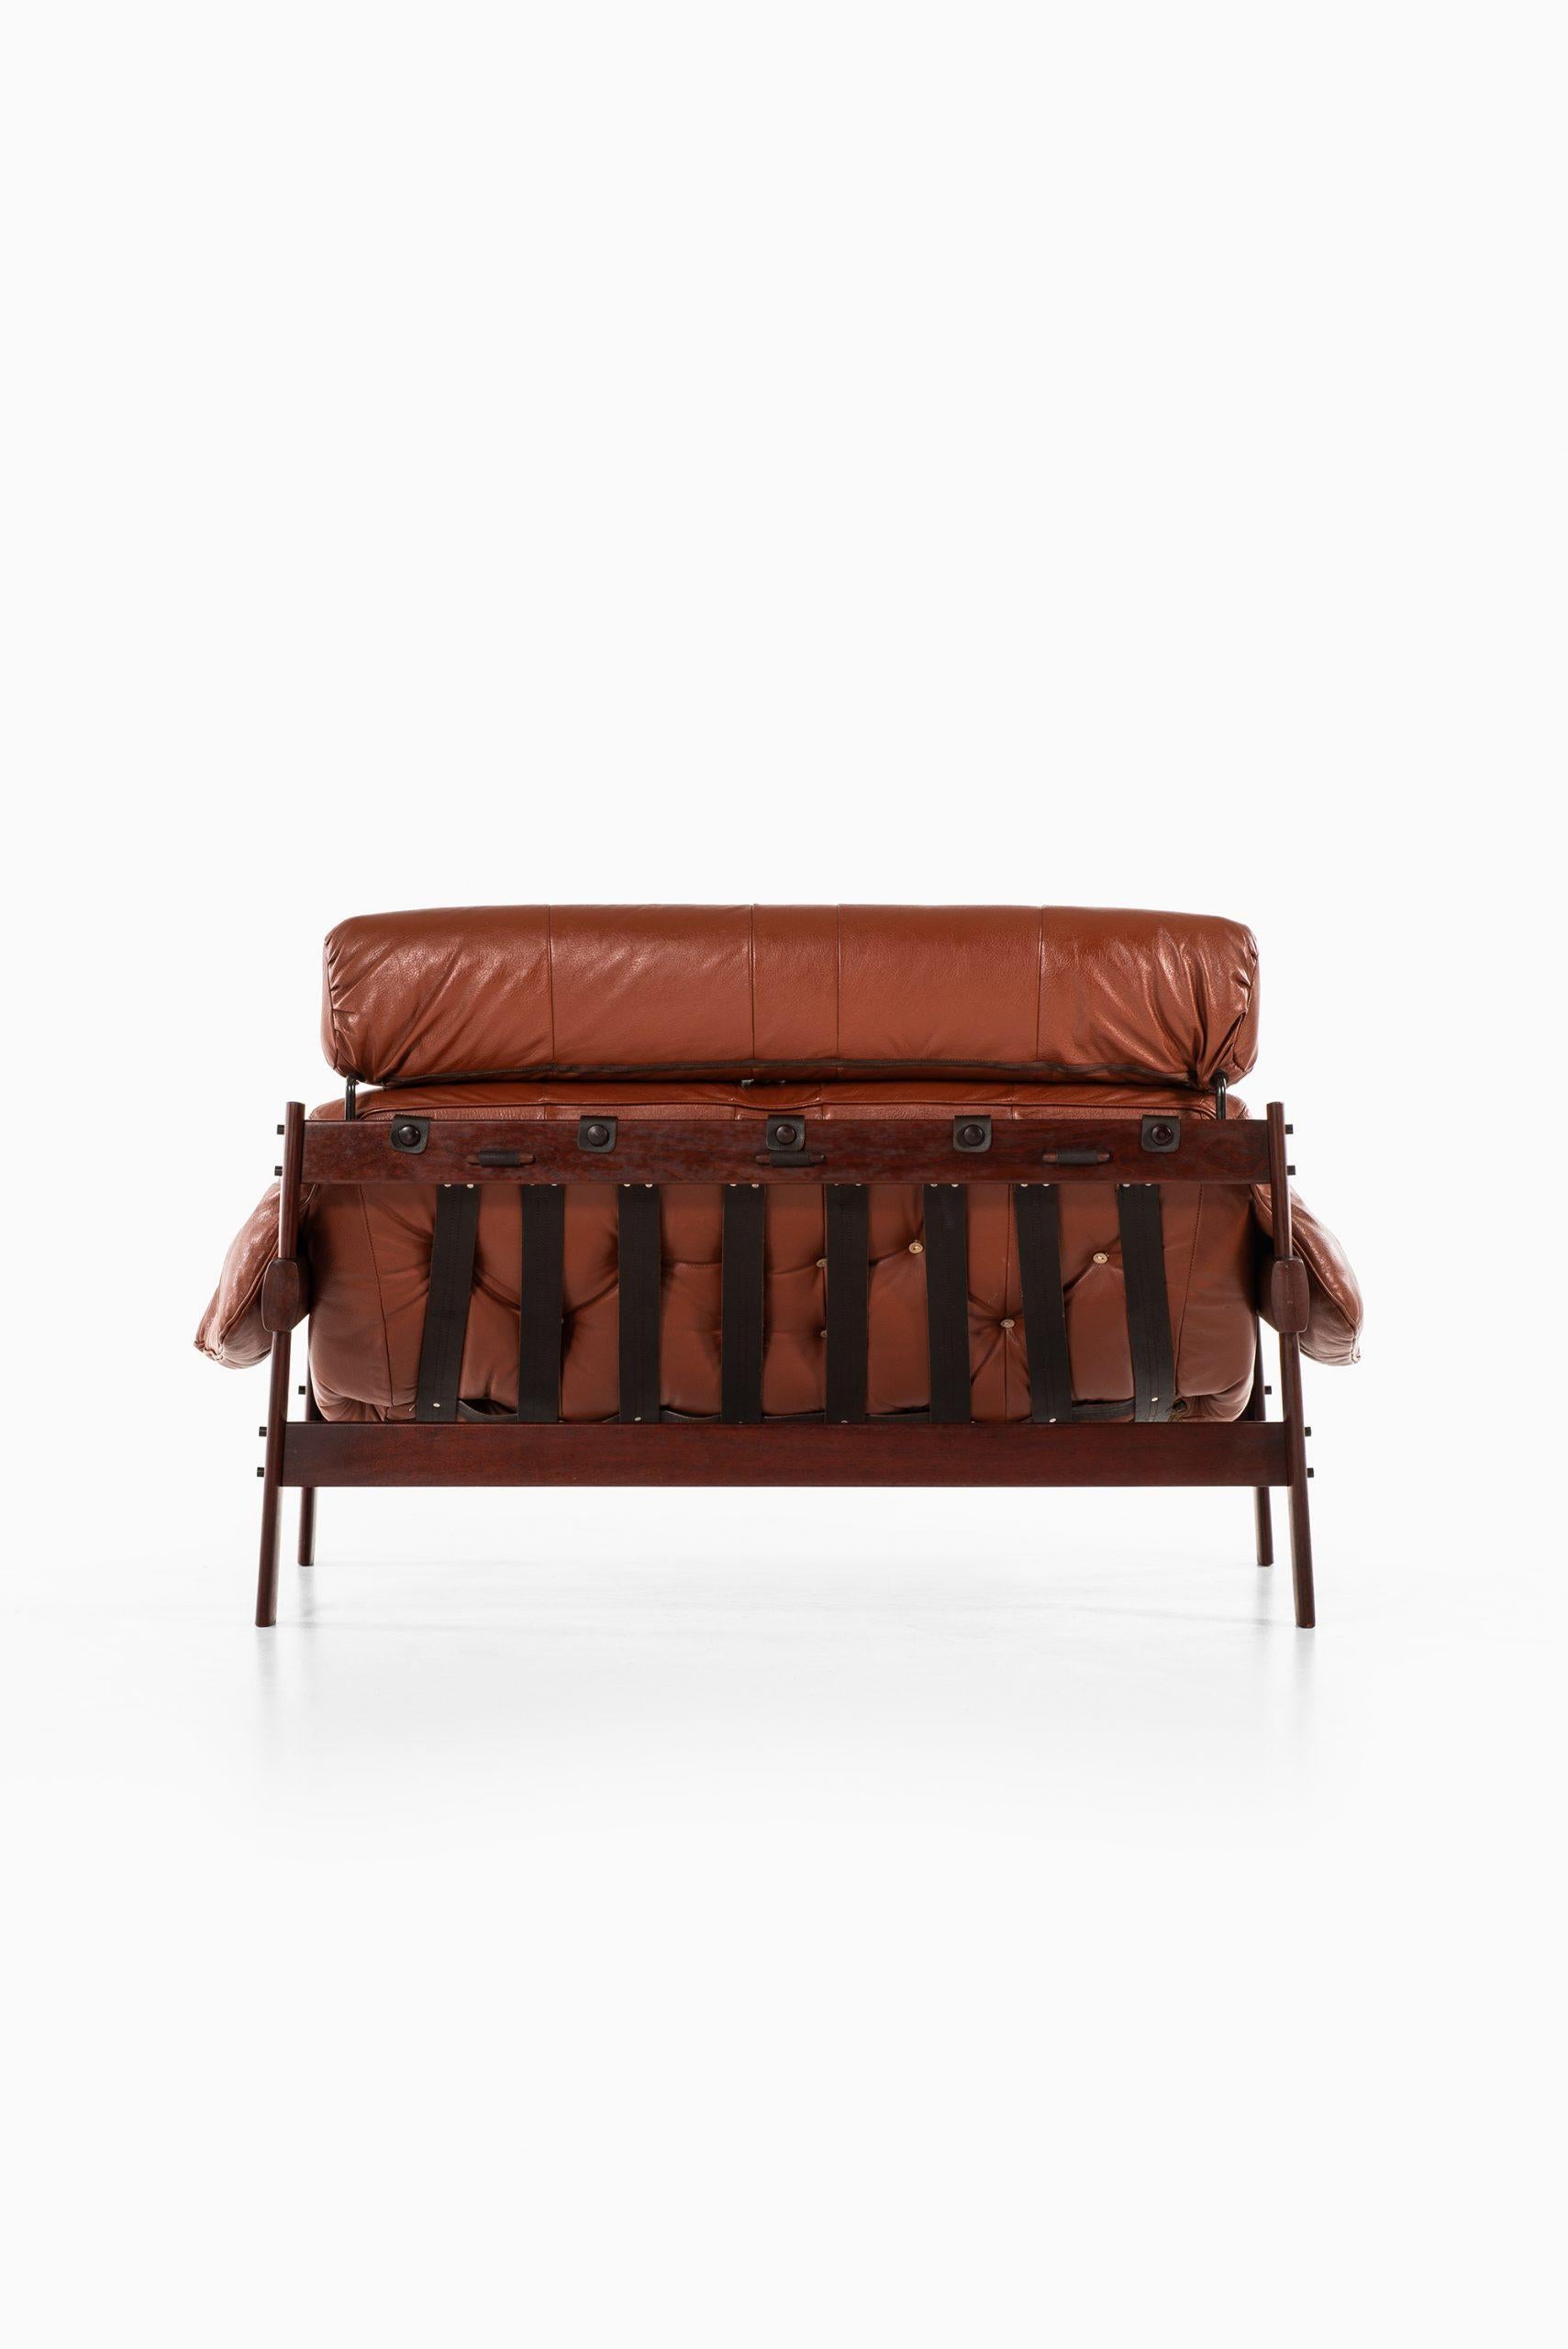 Leather Percival Lafer Sofa Produced by Lafer MP in Brazil